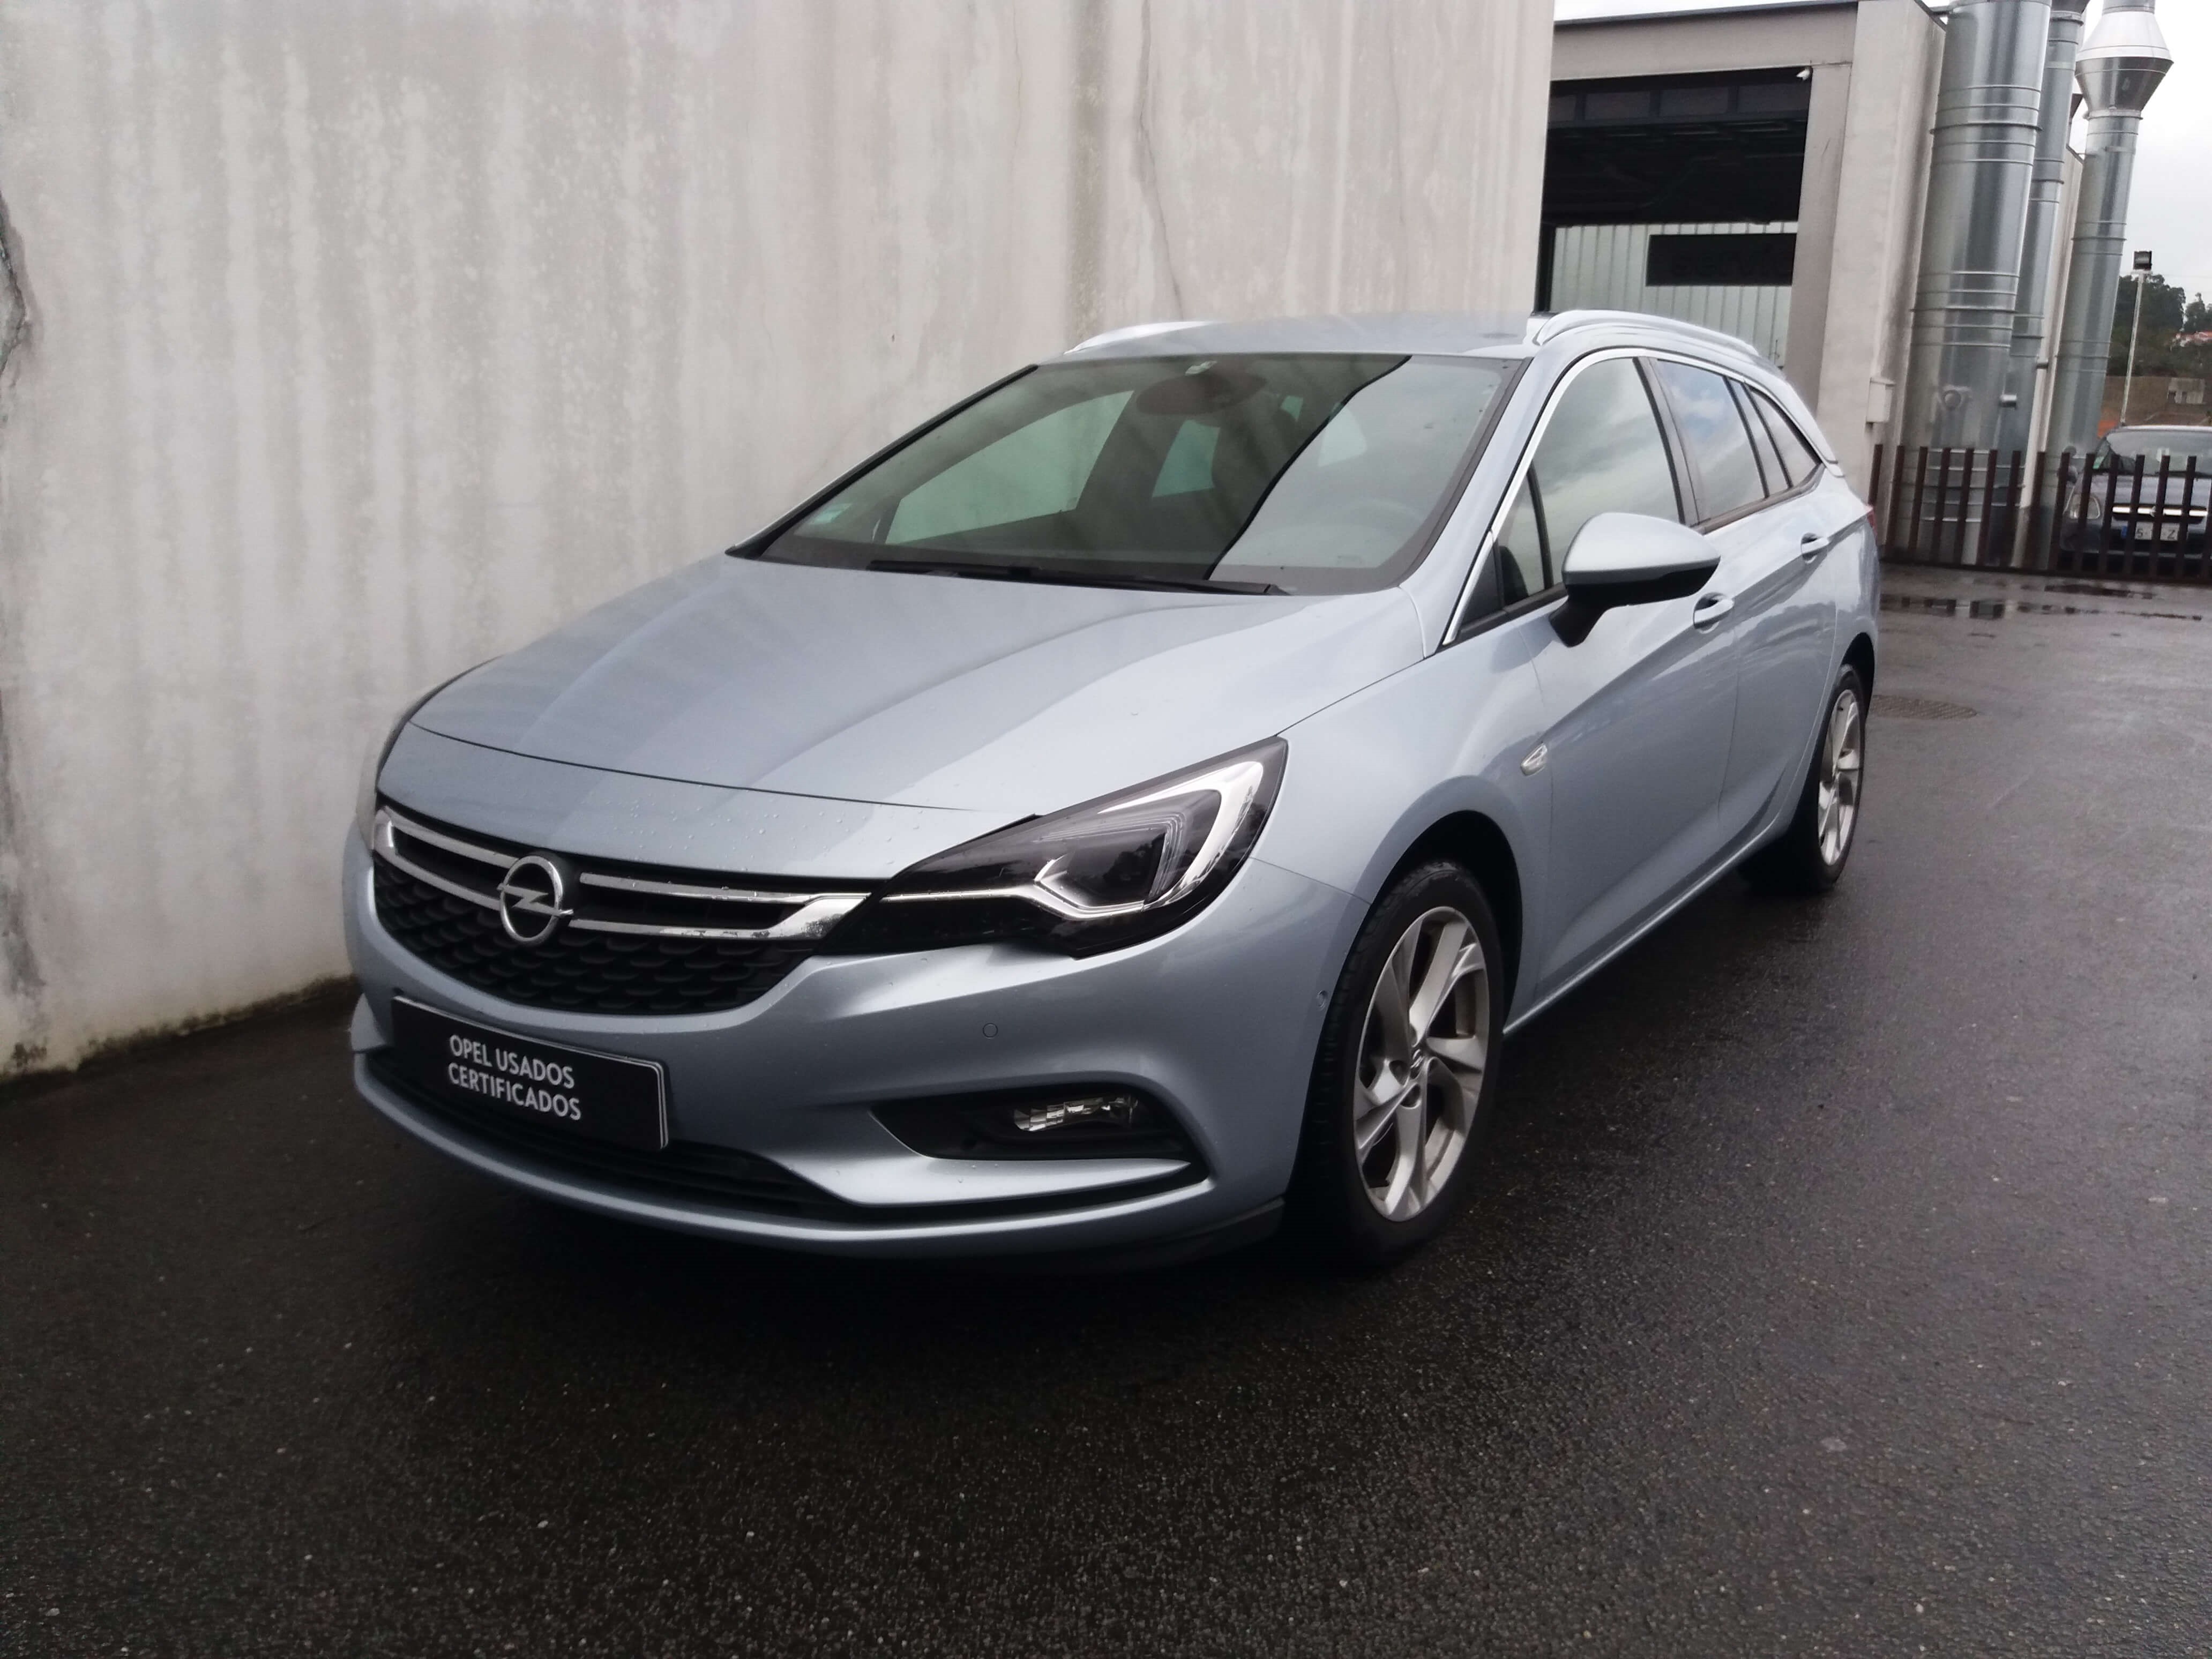 Opel Astra Sports Tourer modern specifications